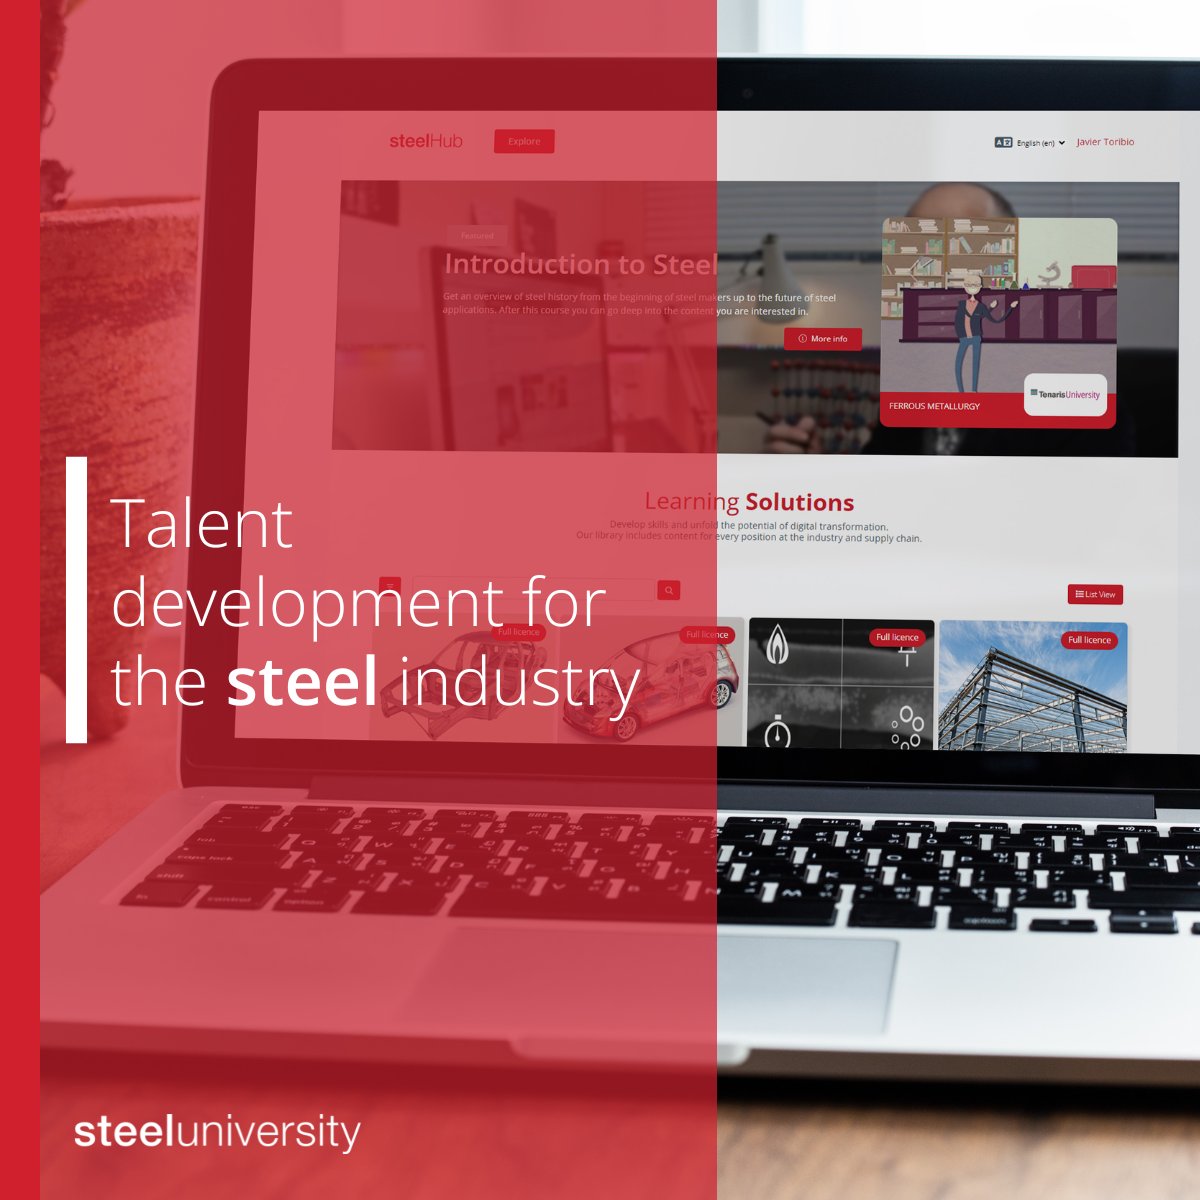 💡 Empower your workforce with the tools they need to succeed today. Join us in shaping the future of steel through innovative talent development! Find out more and contact us for a training solution designed for the #steel industry. hub.steeluniversity.org #TalentDevelopment